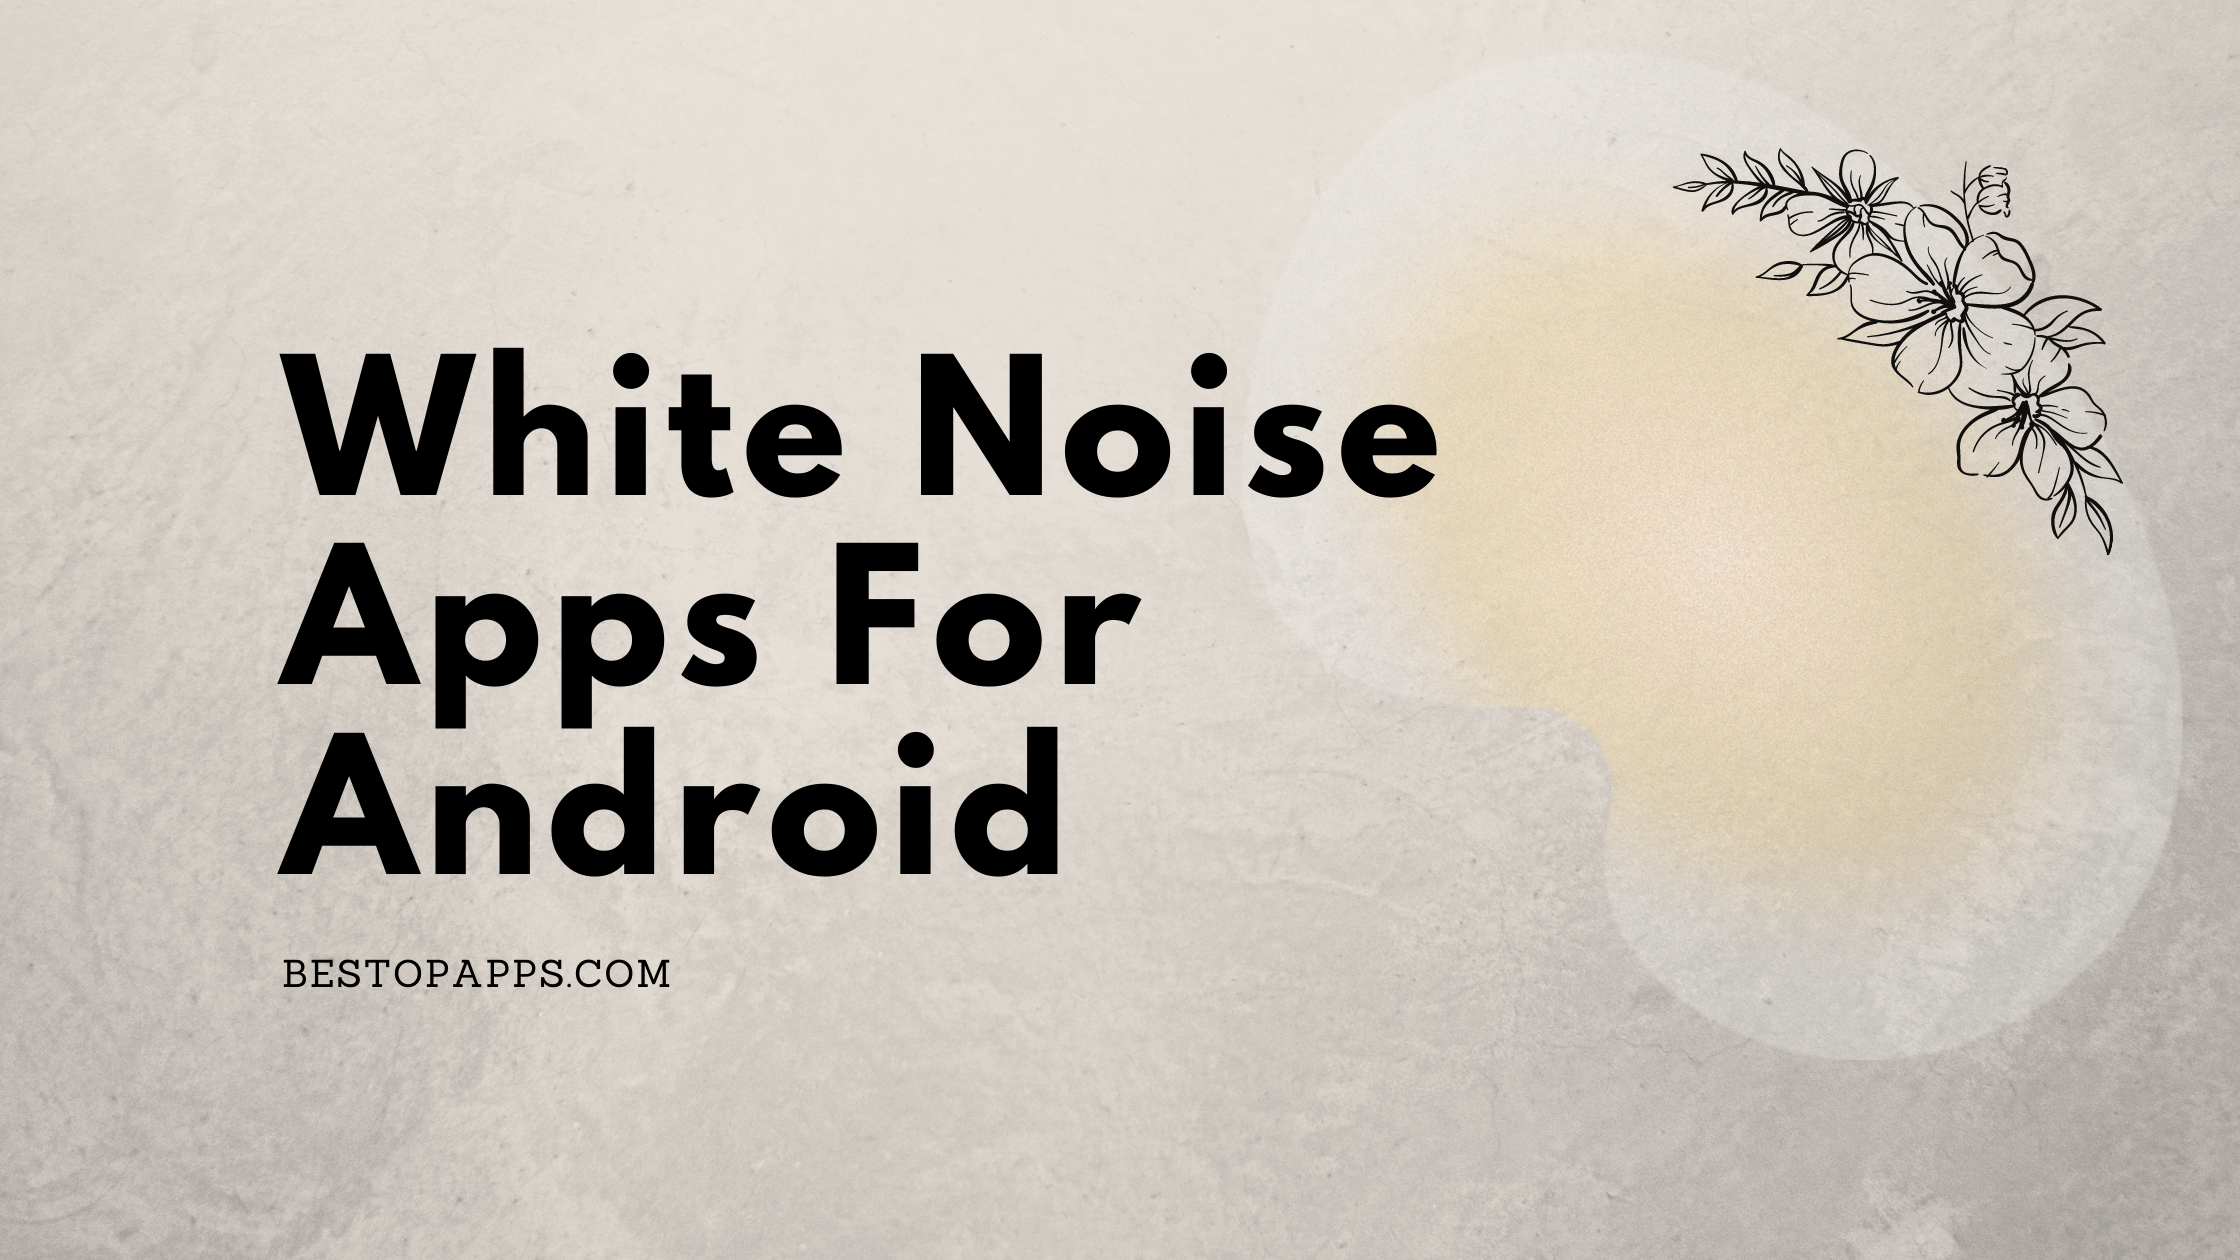 White Noise Apps for Android